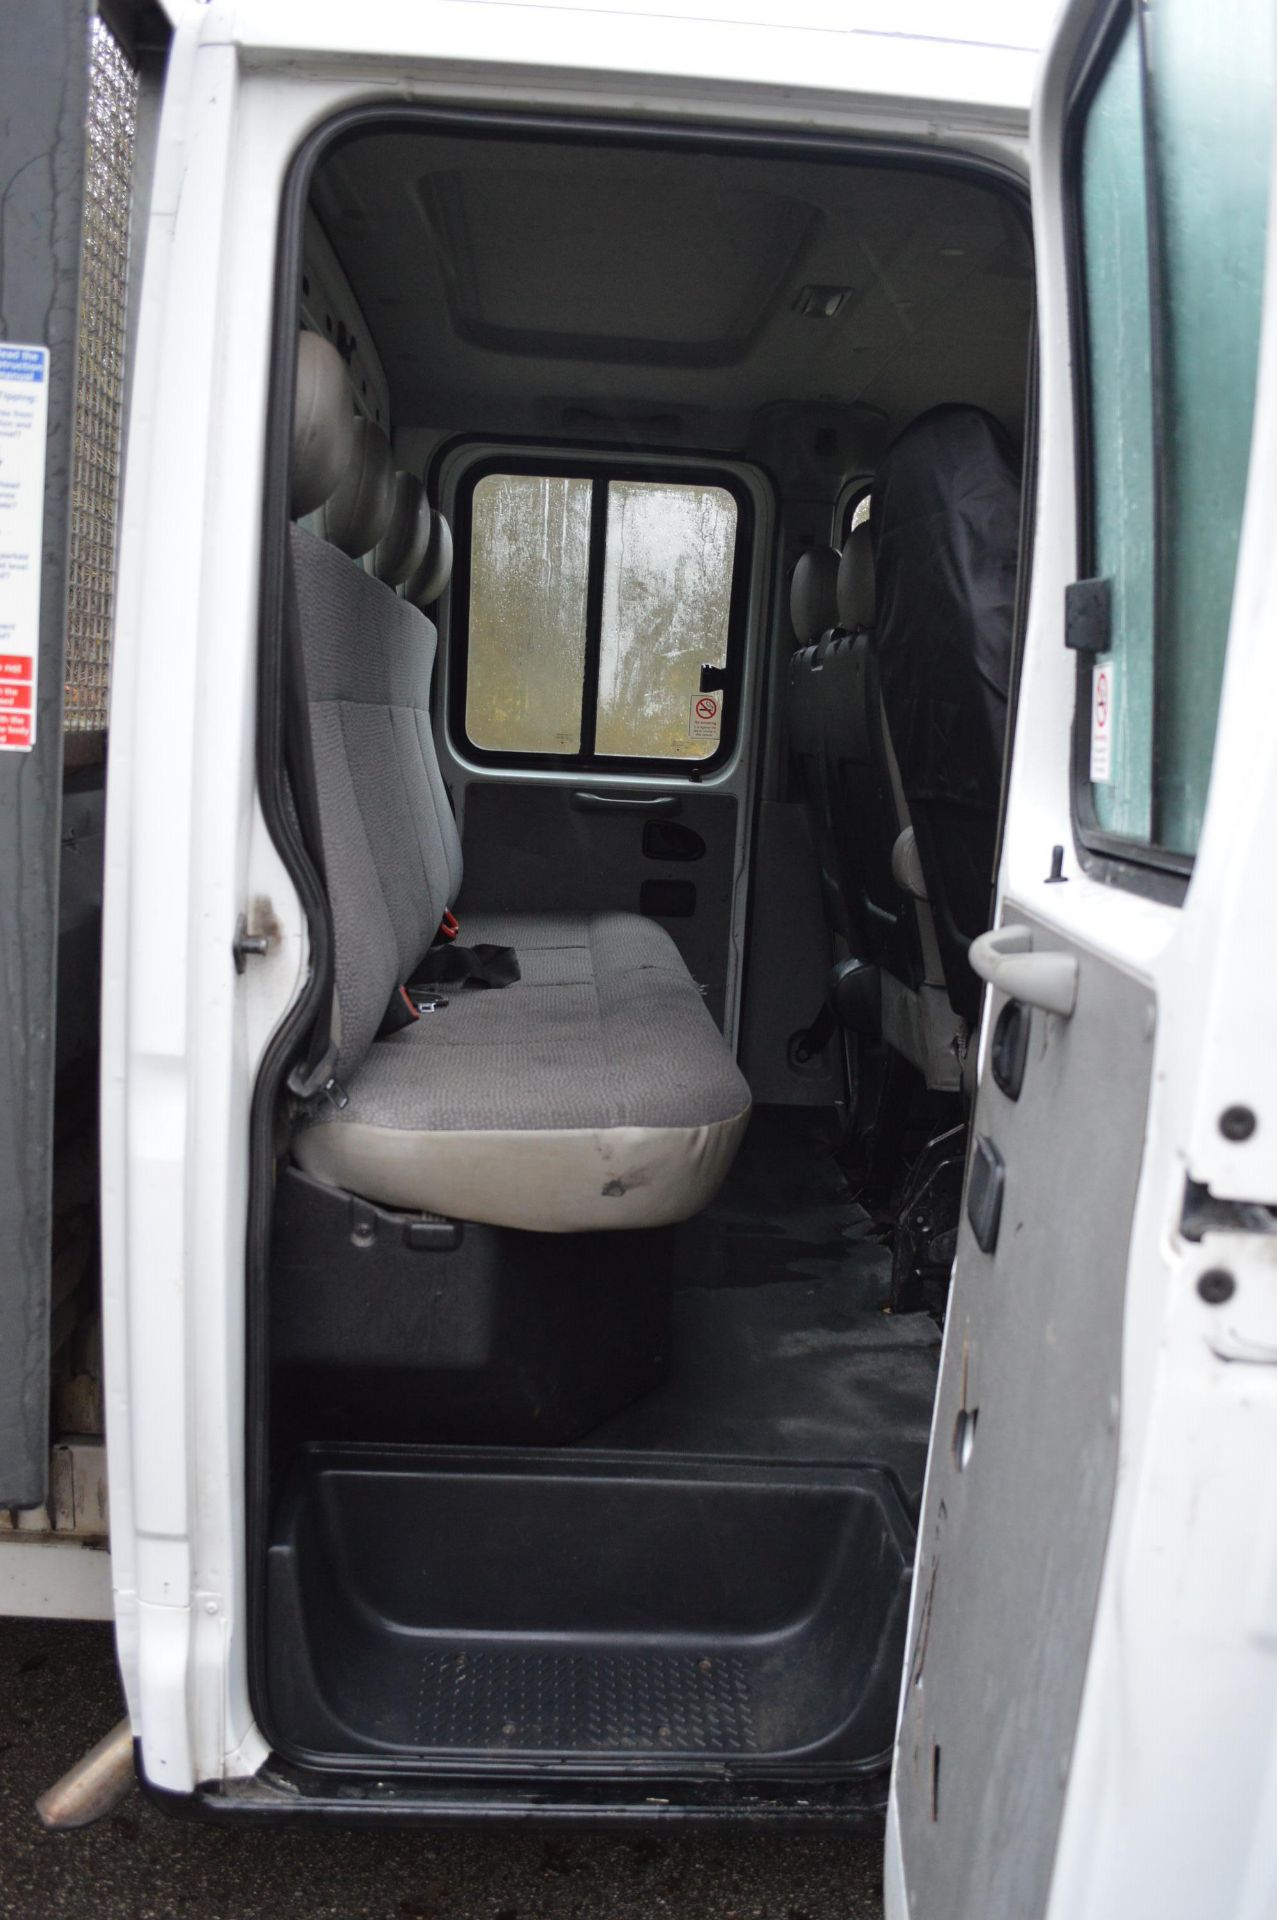 2009/59 REG VAUXHALL MOVANO 3500 CDTI LWB DOUBLE CAB TIPPER, SHOWING 2 FORMER KEEPERS *NO VAT* - Image 7 of 18